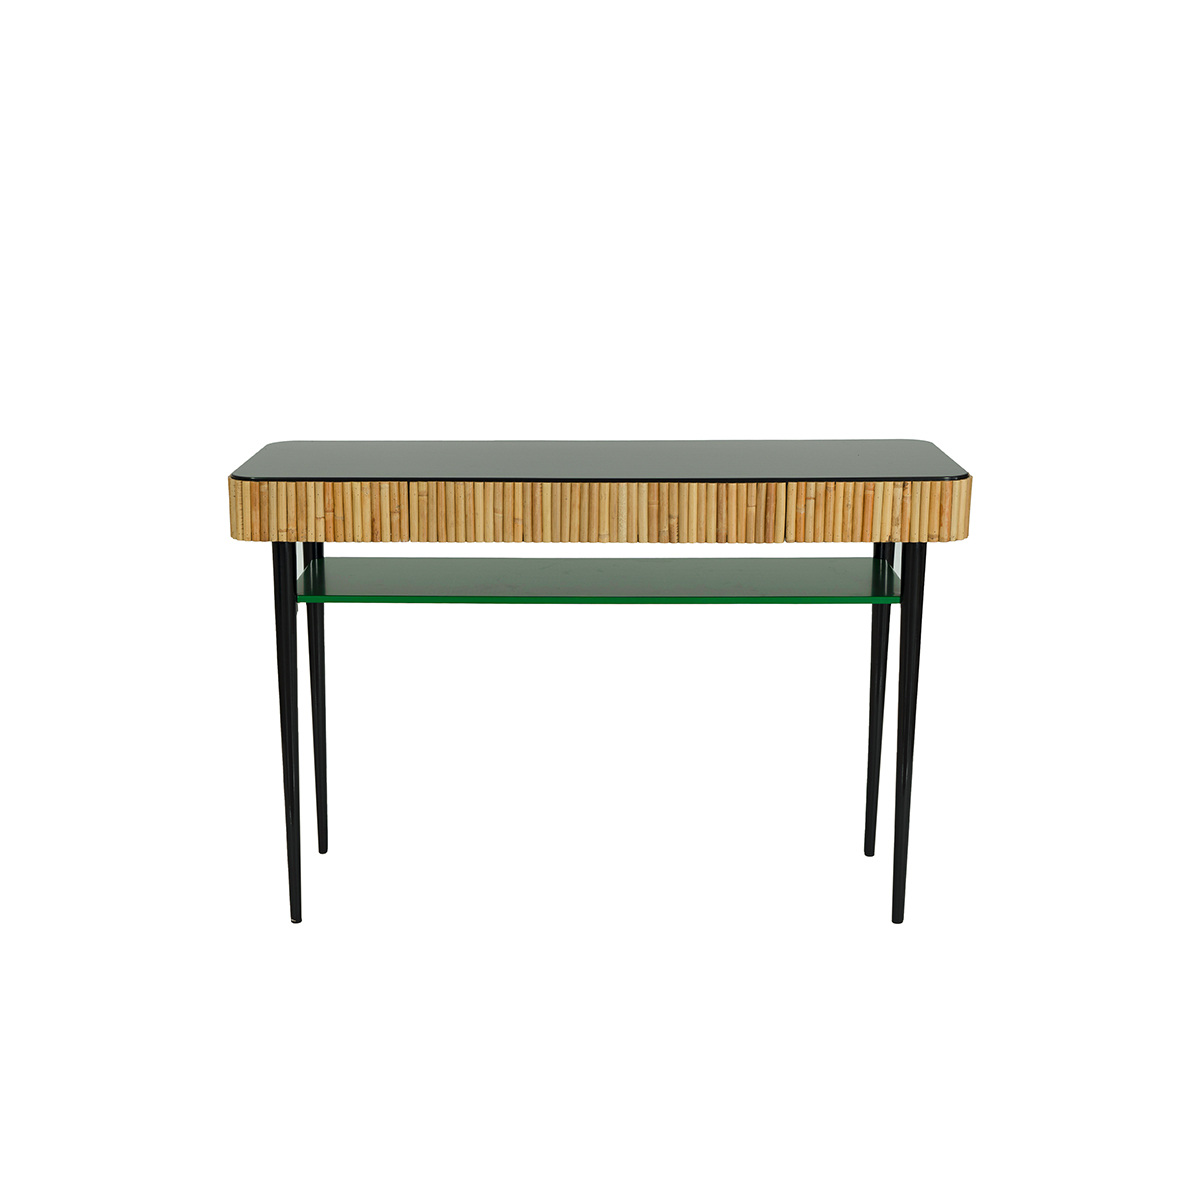 Console Table Riviera, Green - L120 cm - Rattan / Lacquered wood - image 1